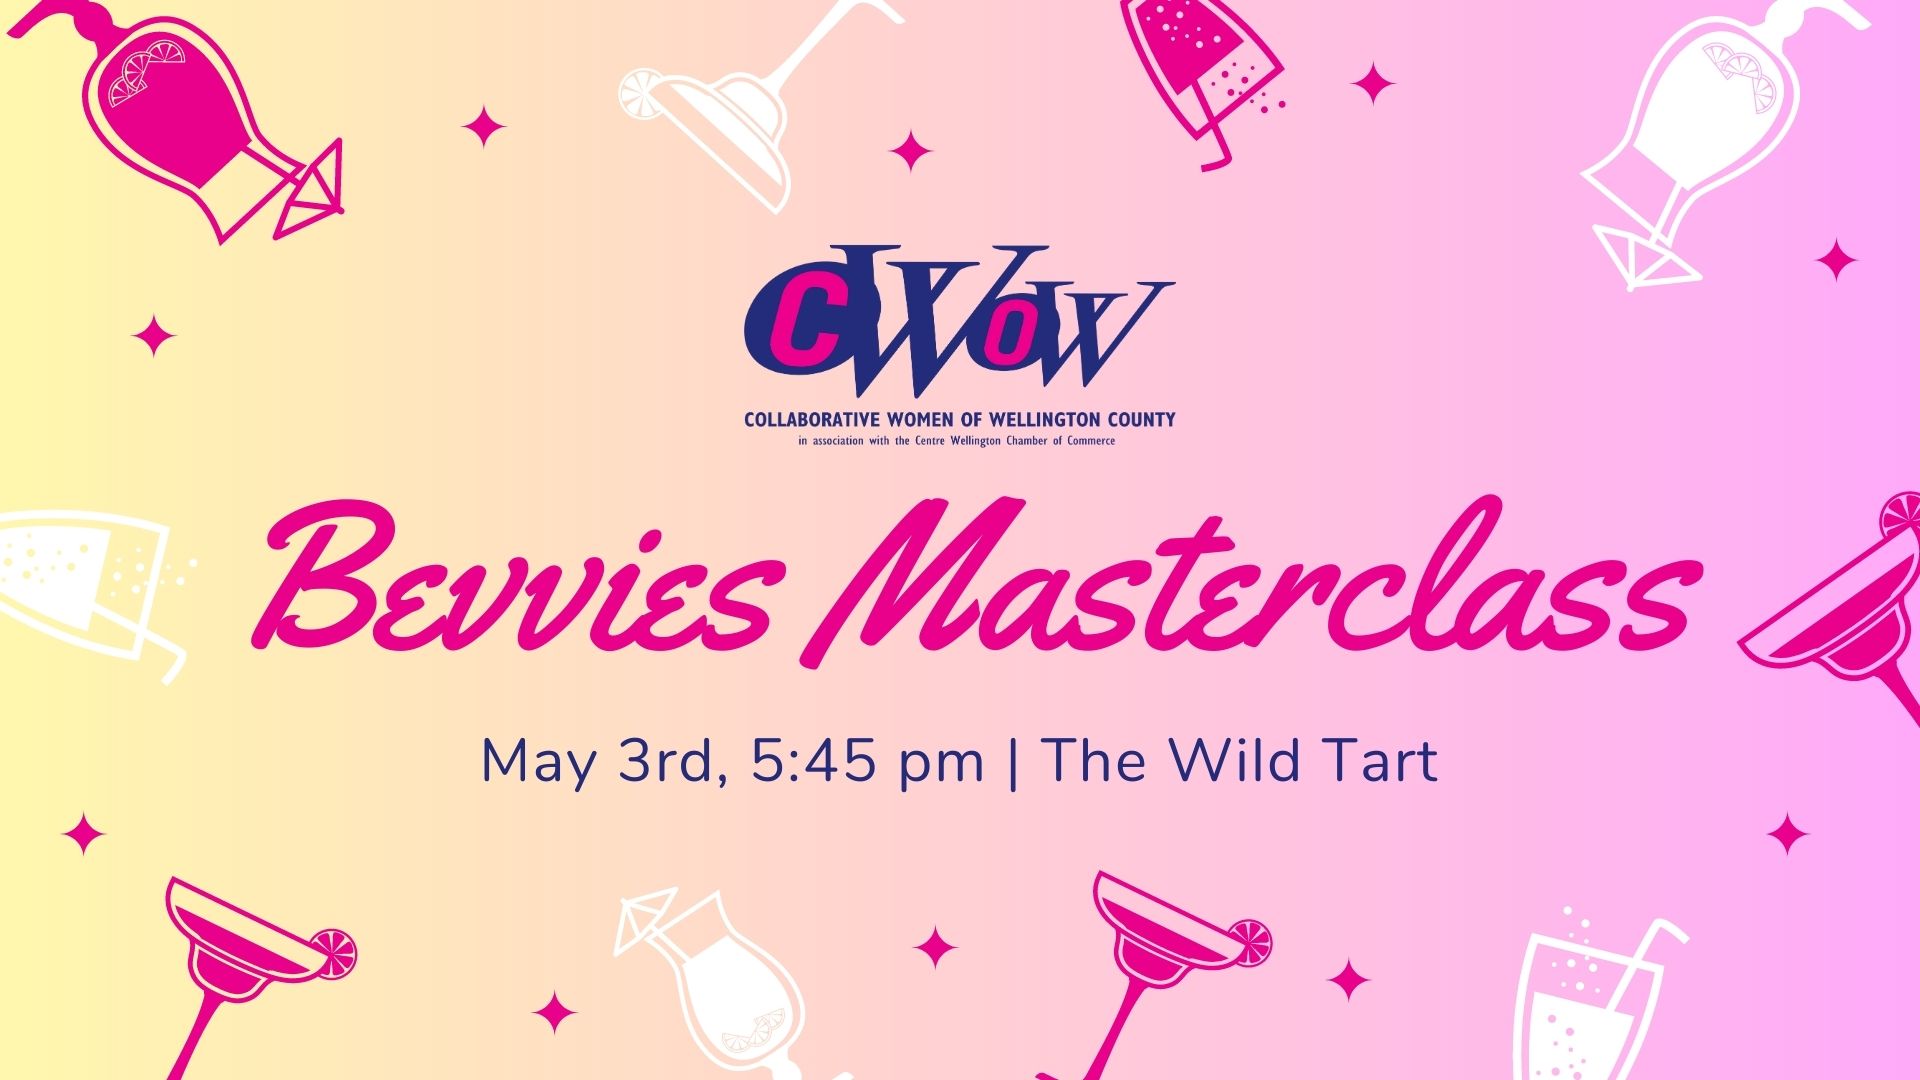 Bevvies Masterclass with CWOW